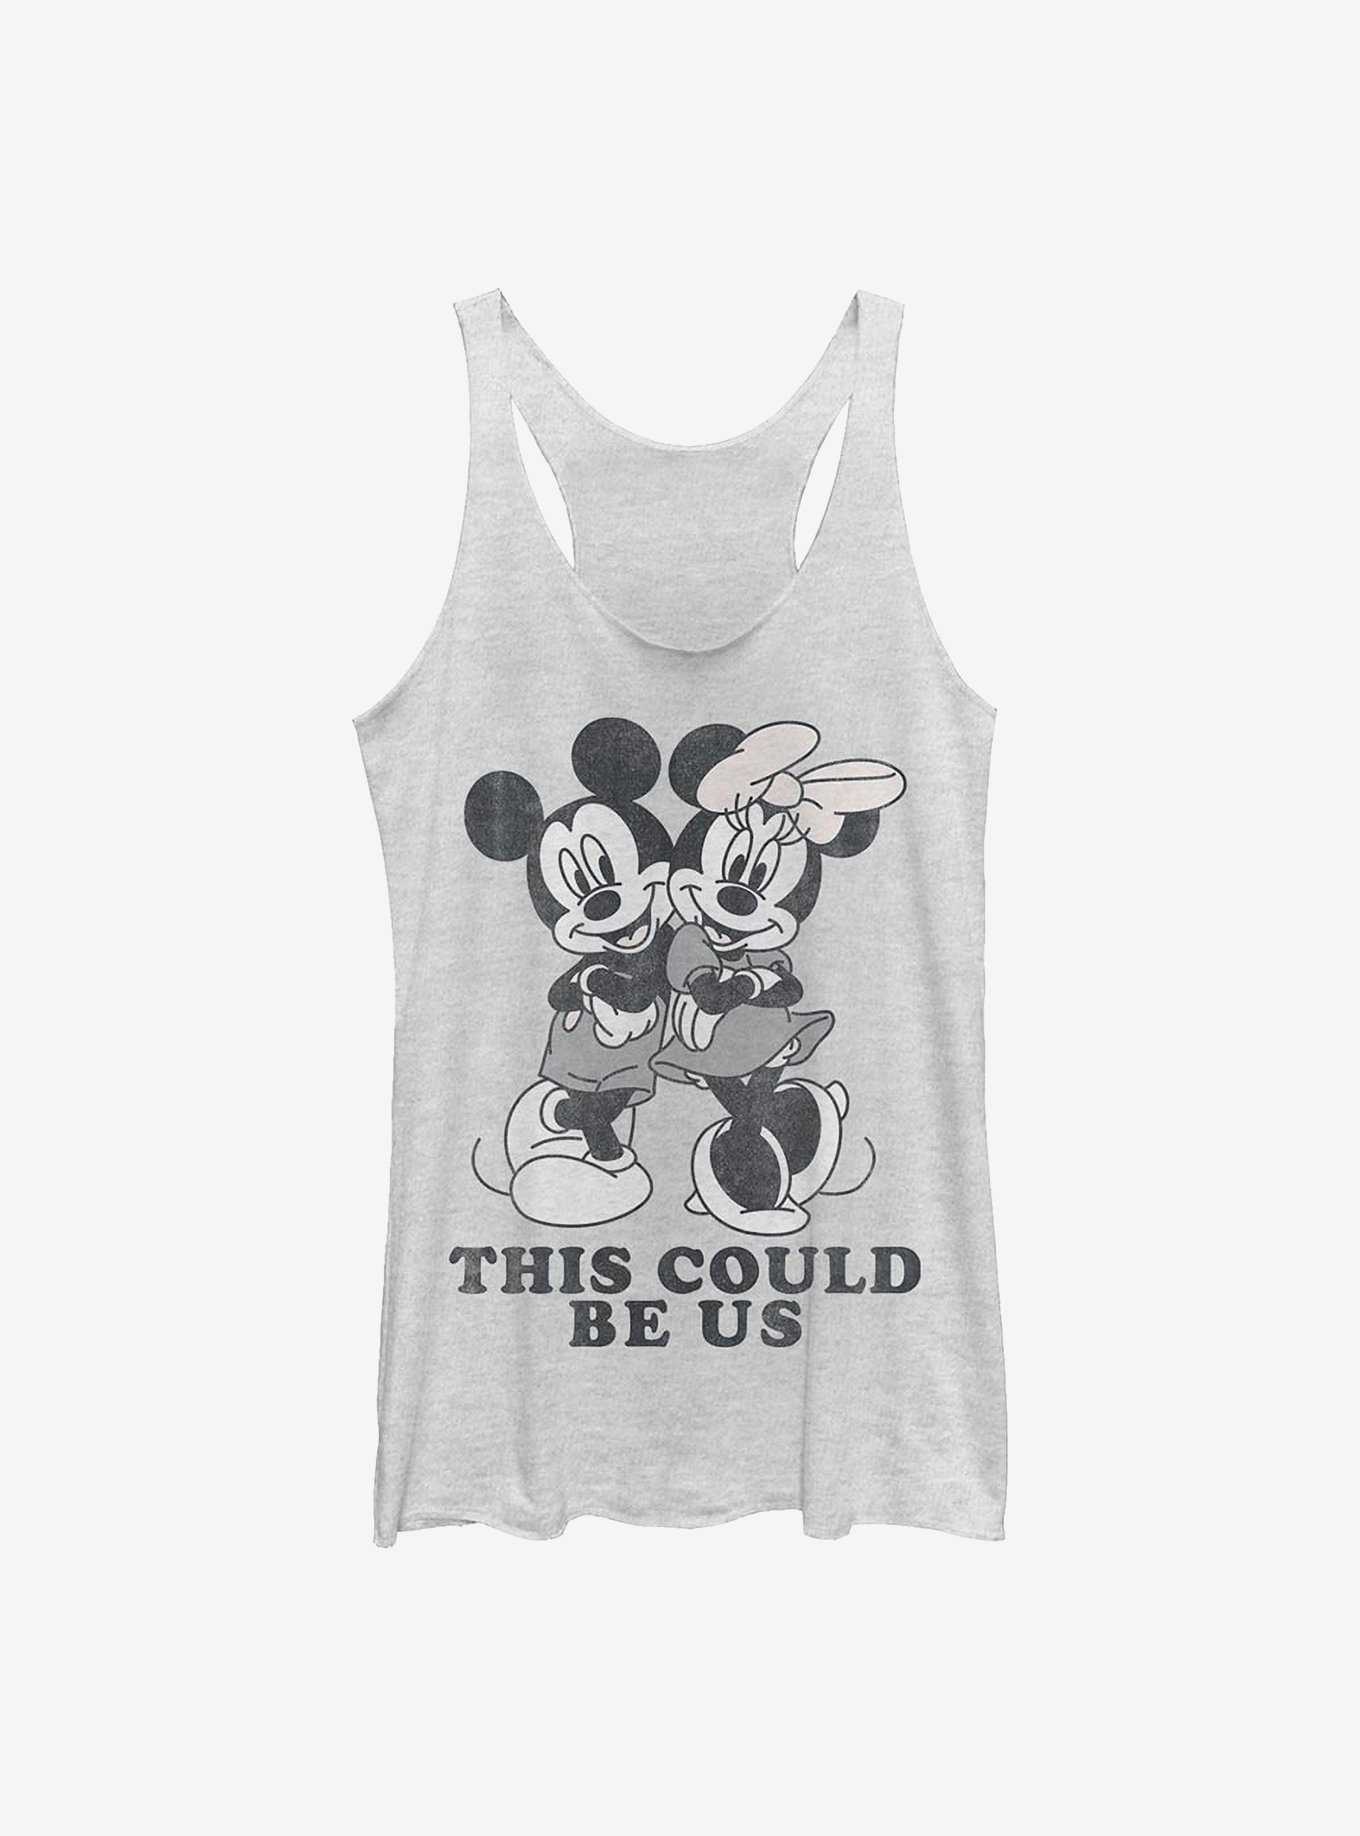 Disney Mickey Mouse Could Be Us Womens Tank Top, , hi-res